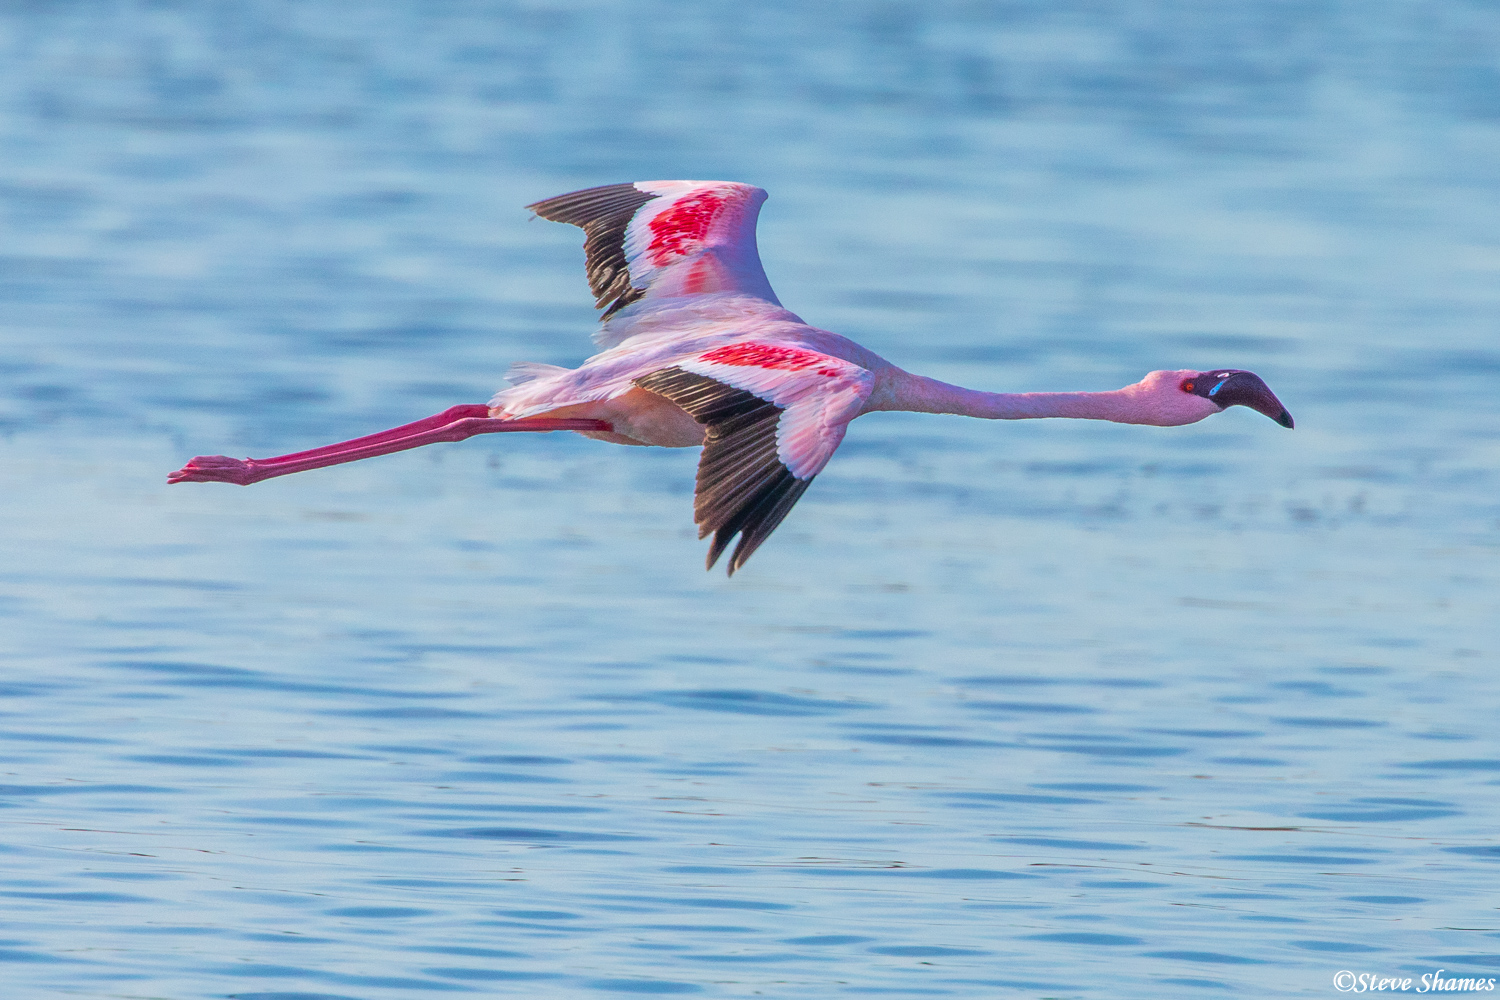 A graceful flamingo effortlessly gliding over the water.